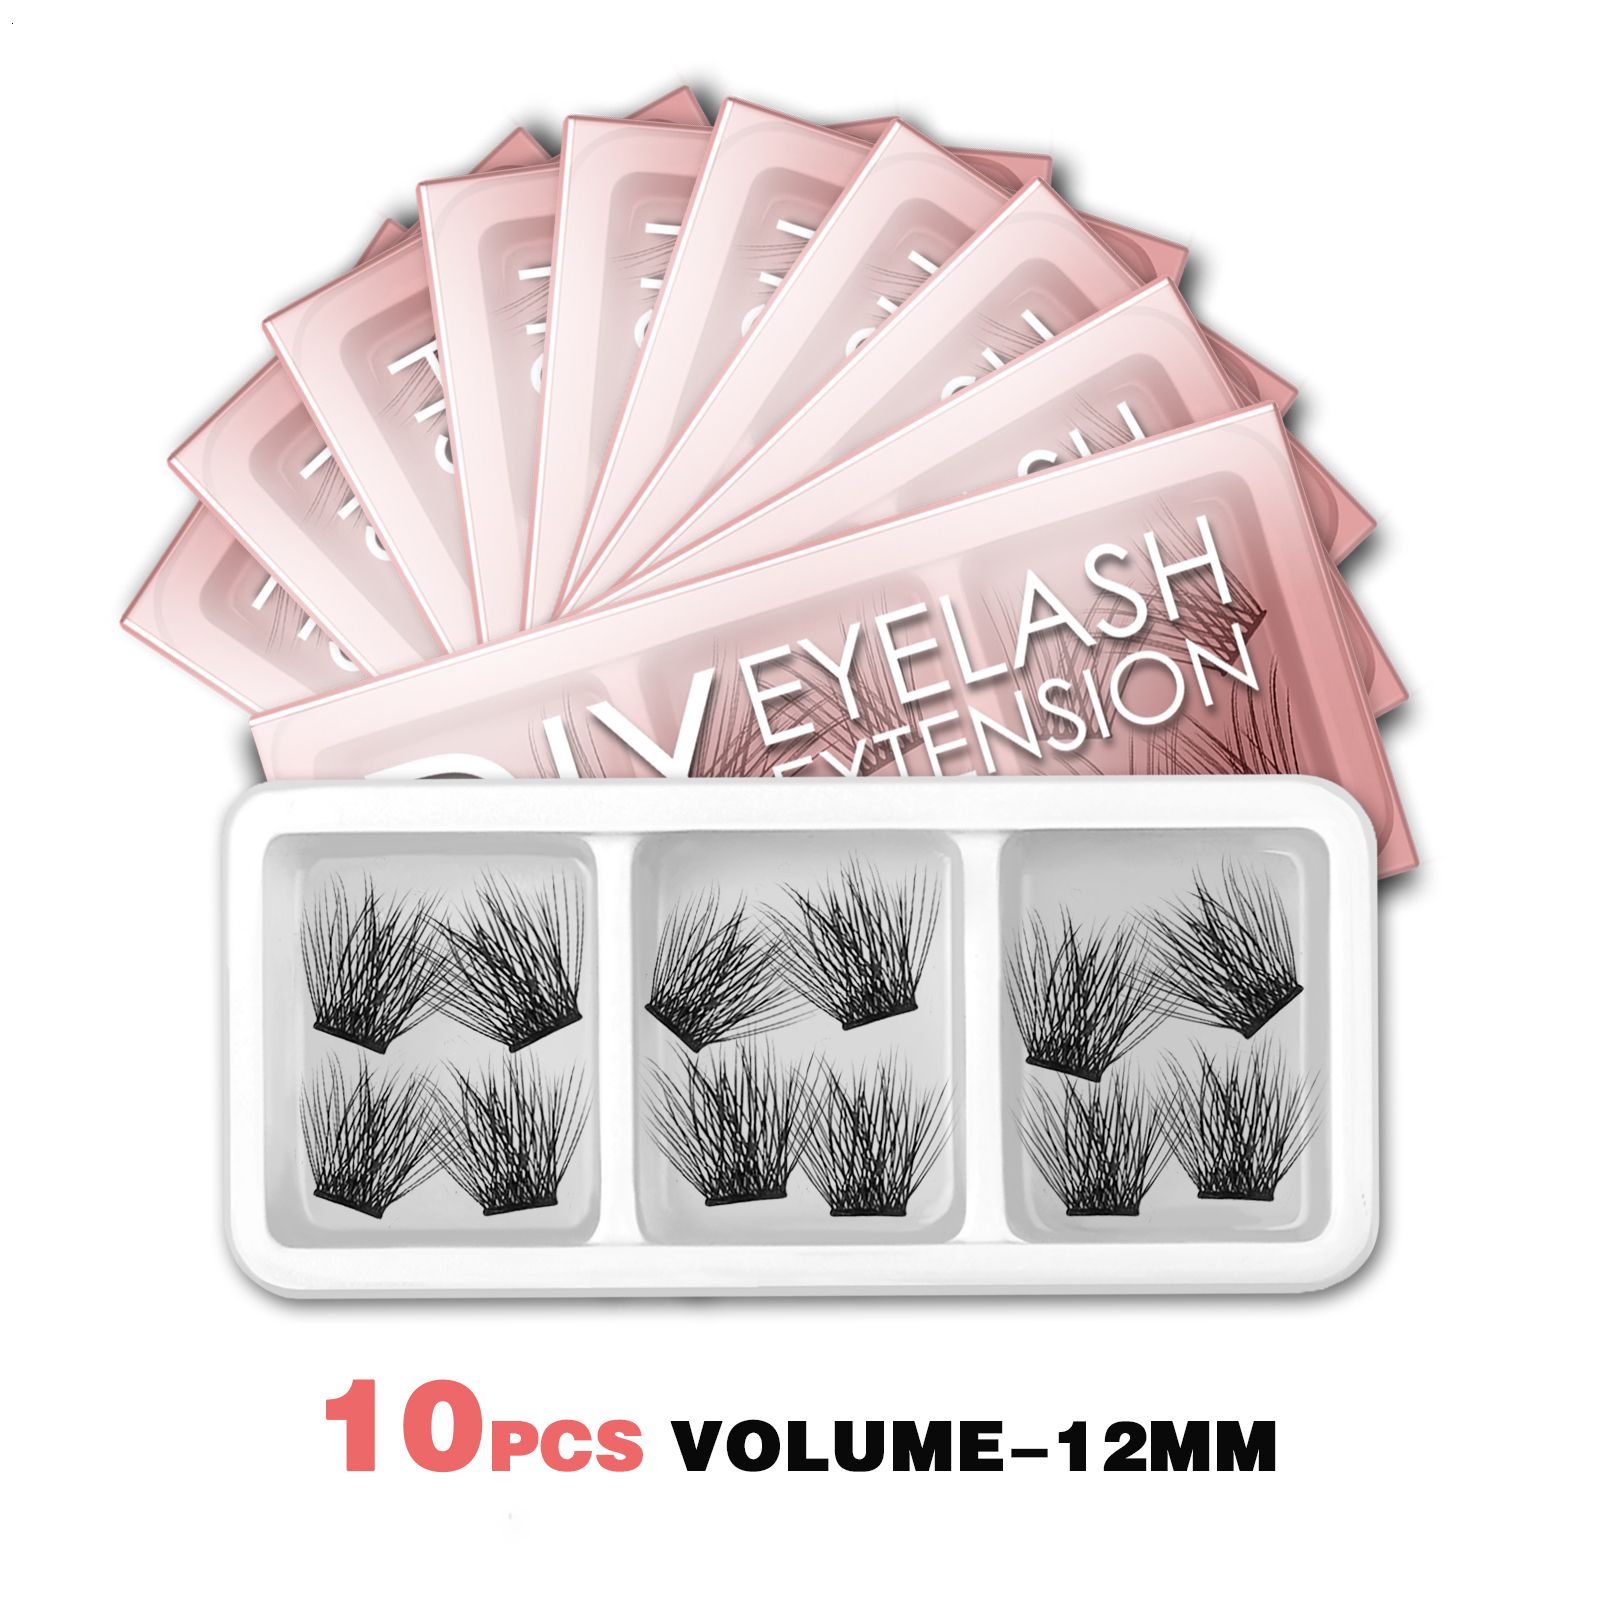 10 Boxes Volume 12mm